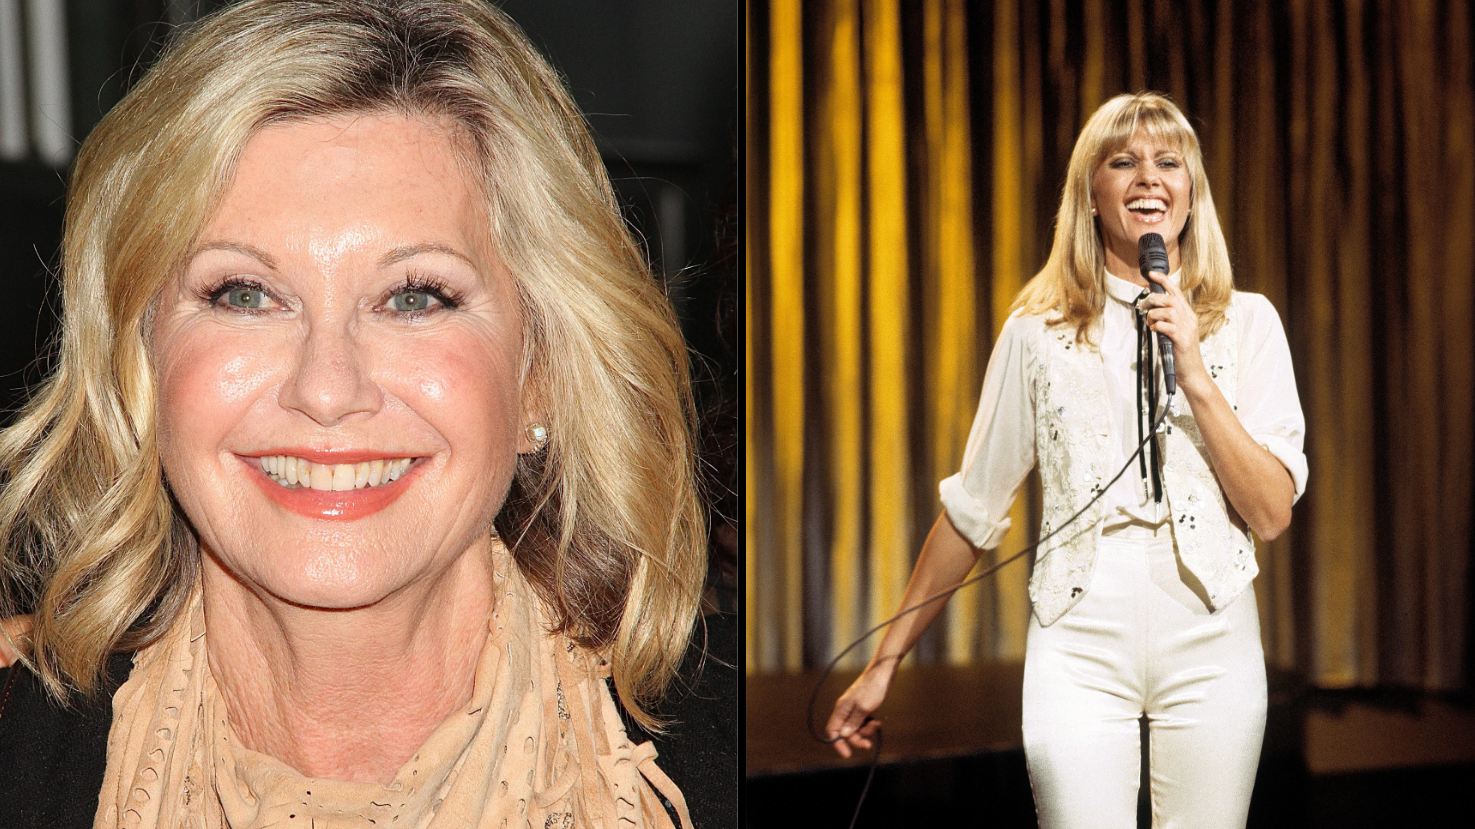 Olivia Newton-John could receive a state funeral to give the late icon a fitting send-off